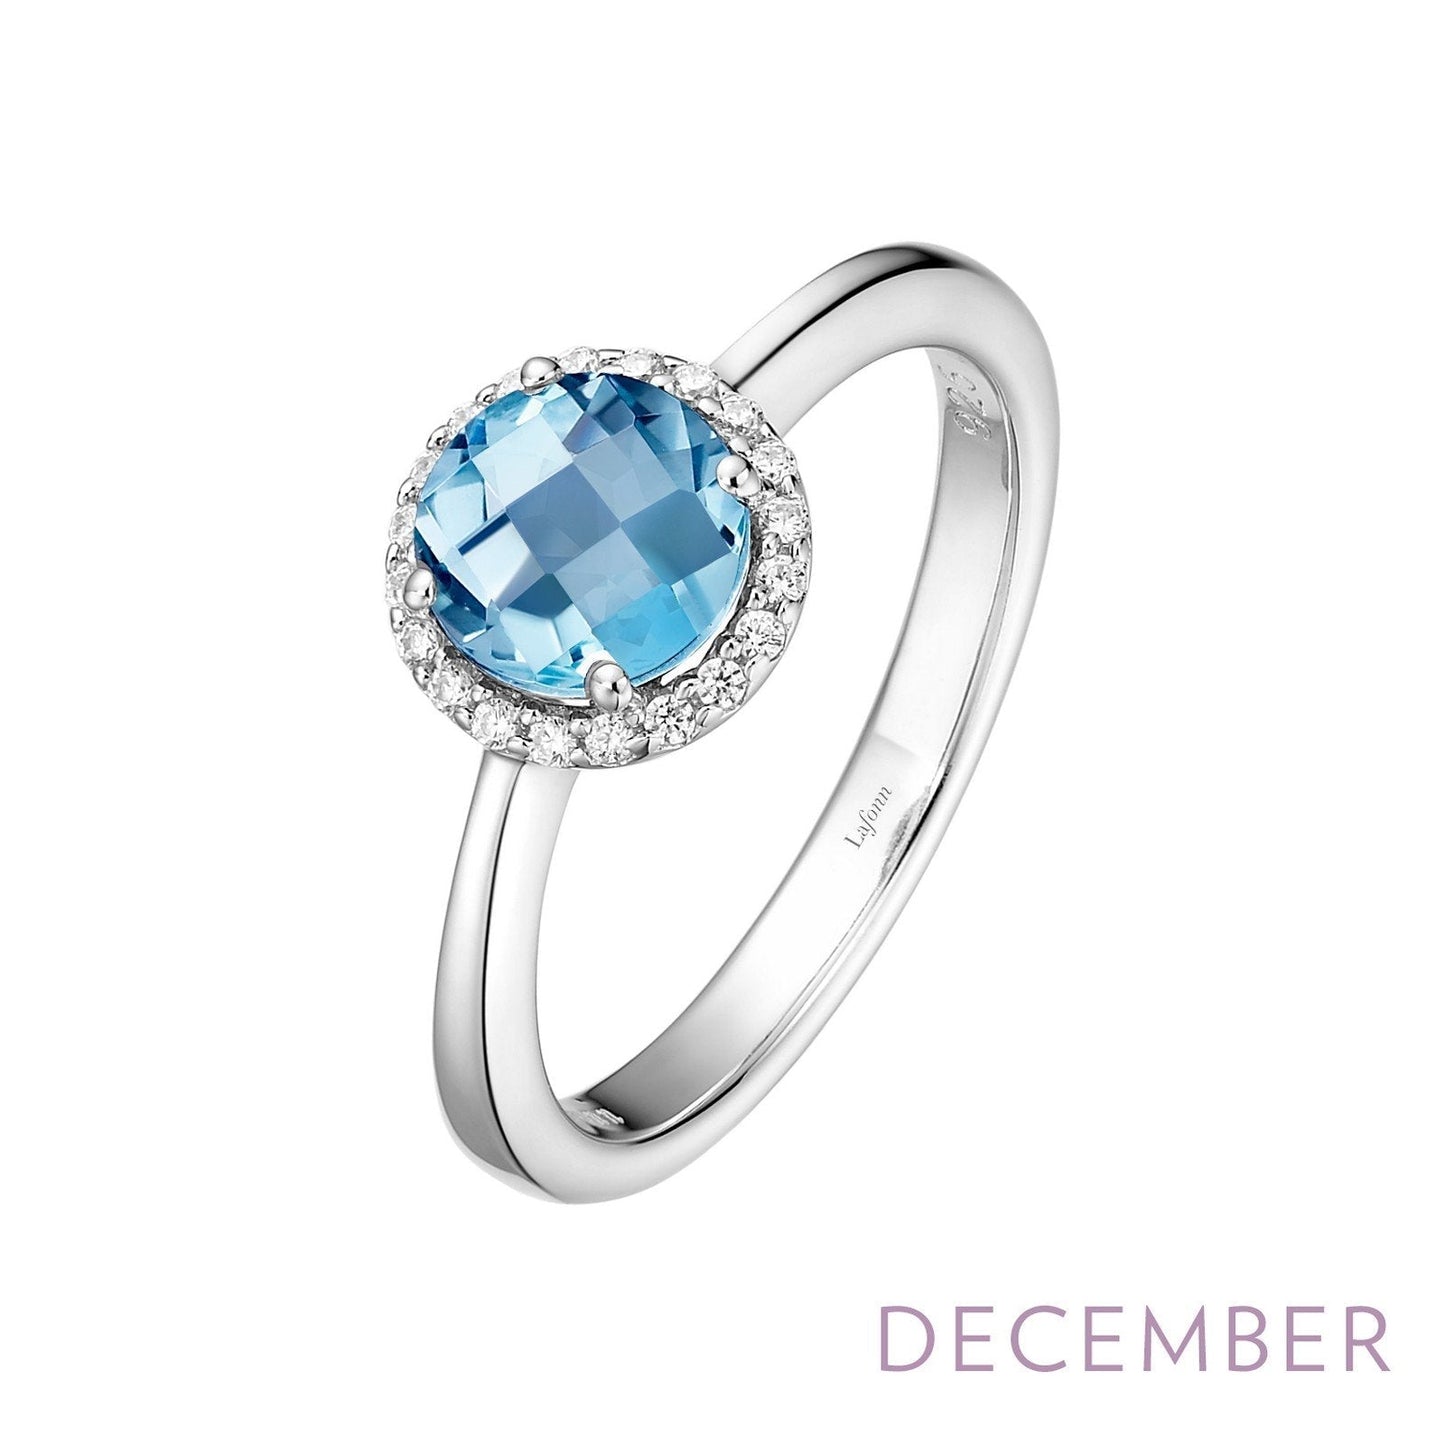 Lafonn December Birthstone Ring DECEMBER RINGS Size 7 Platinum Appx CTW: 1.05 cts. Blue Topaz Appx 0.85 cts.  Lassaire simulated diamonds: 0.20 cts. CTS 